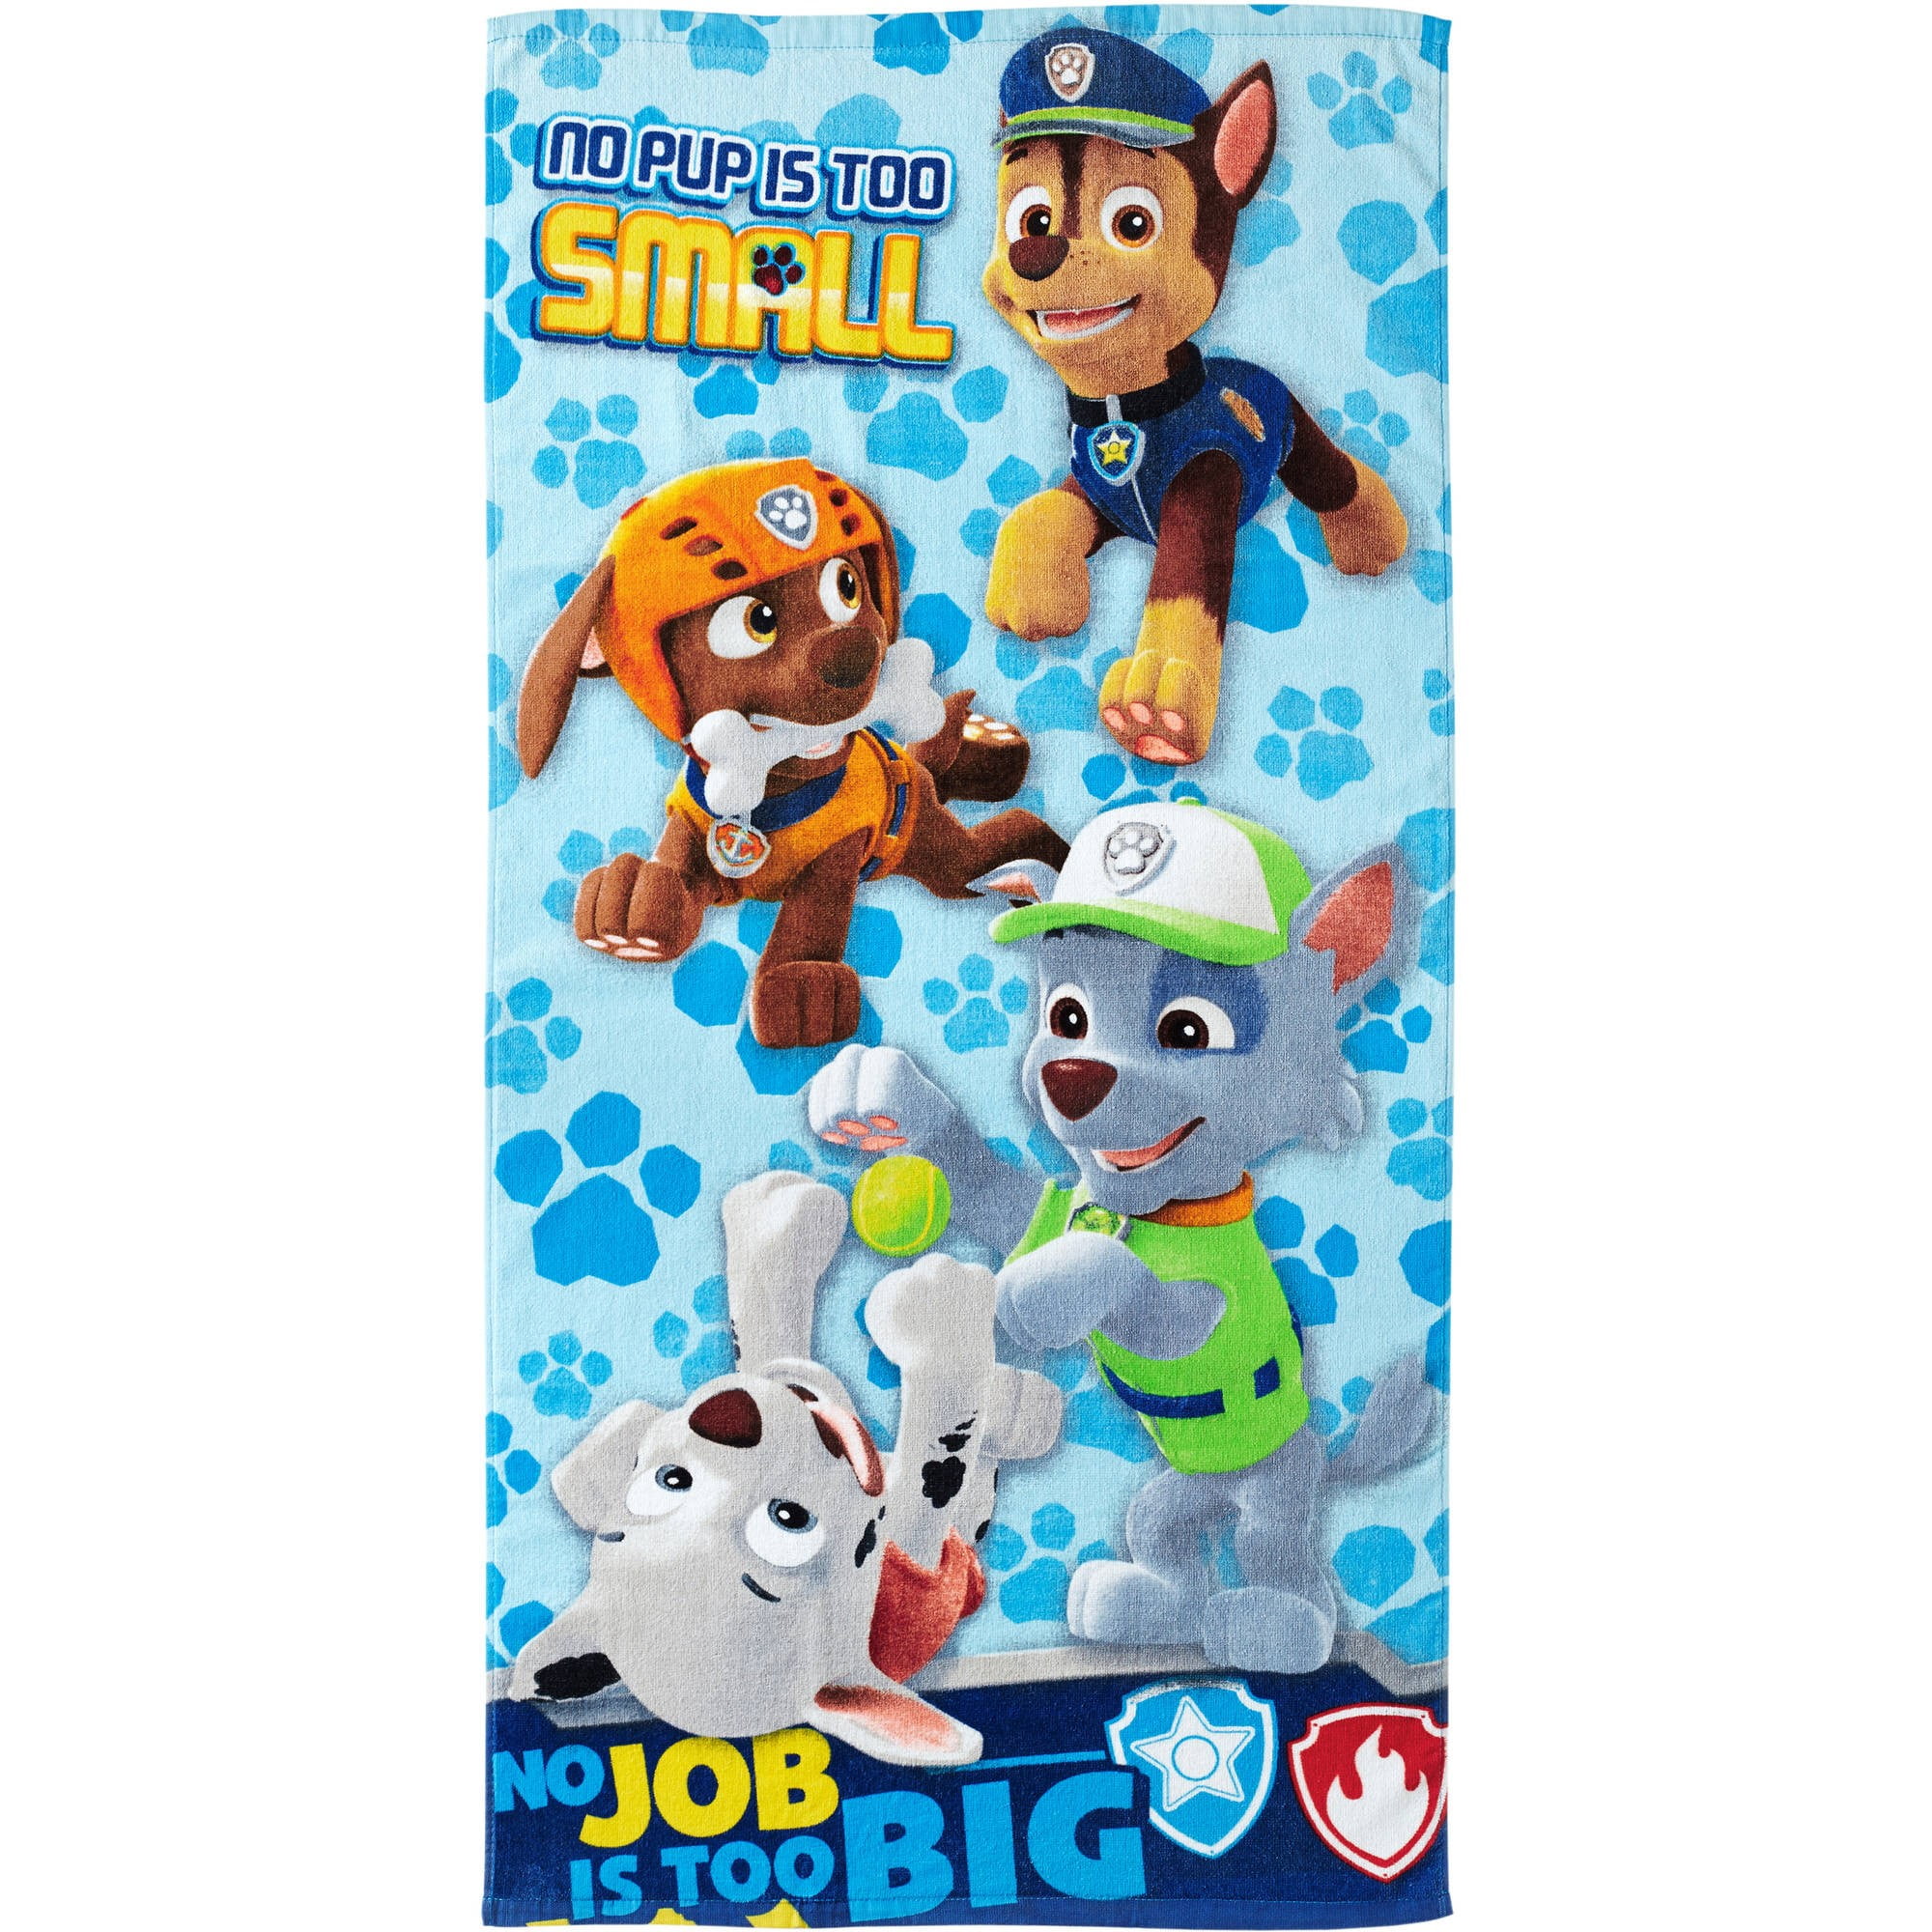 Cotton 15 x 5 x 10 cm Nickelodeon New Import Set of 2 Bath Towels with Paw Patrol Design 